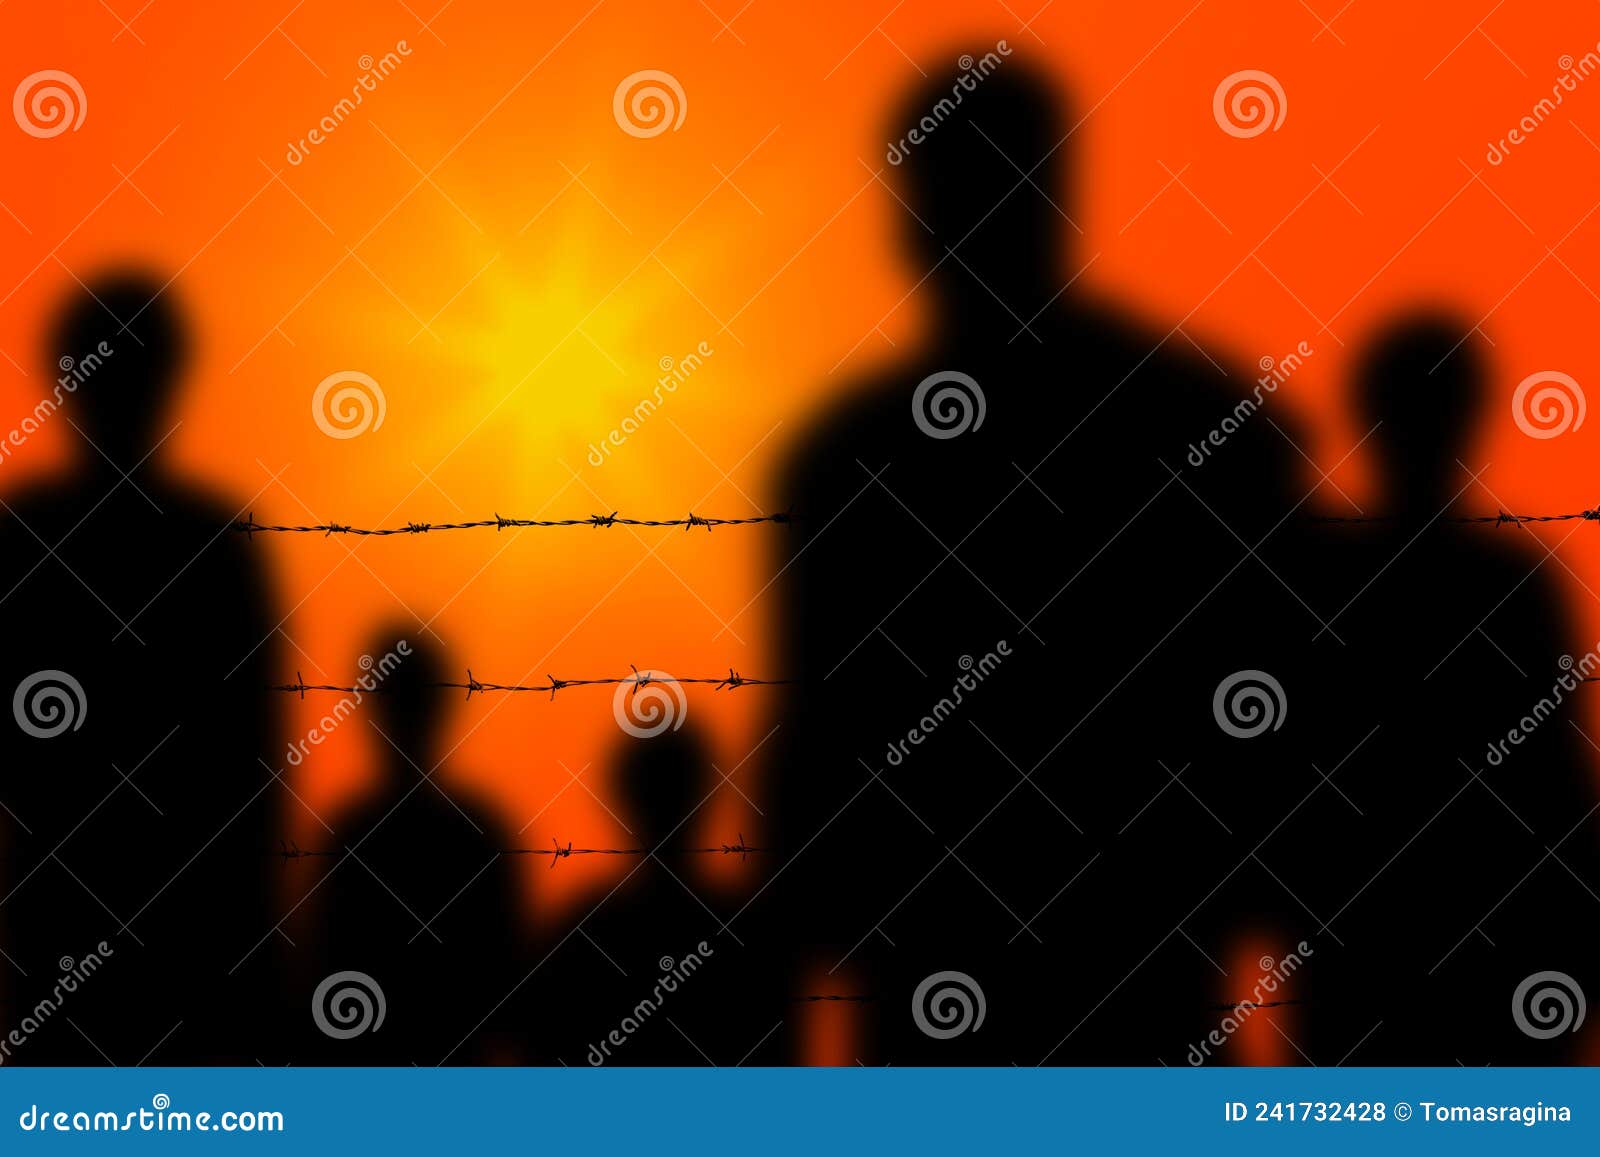 the refugees migrate to europe union . silhouette of illegal immigrants